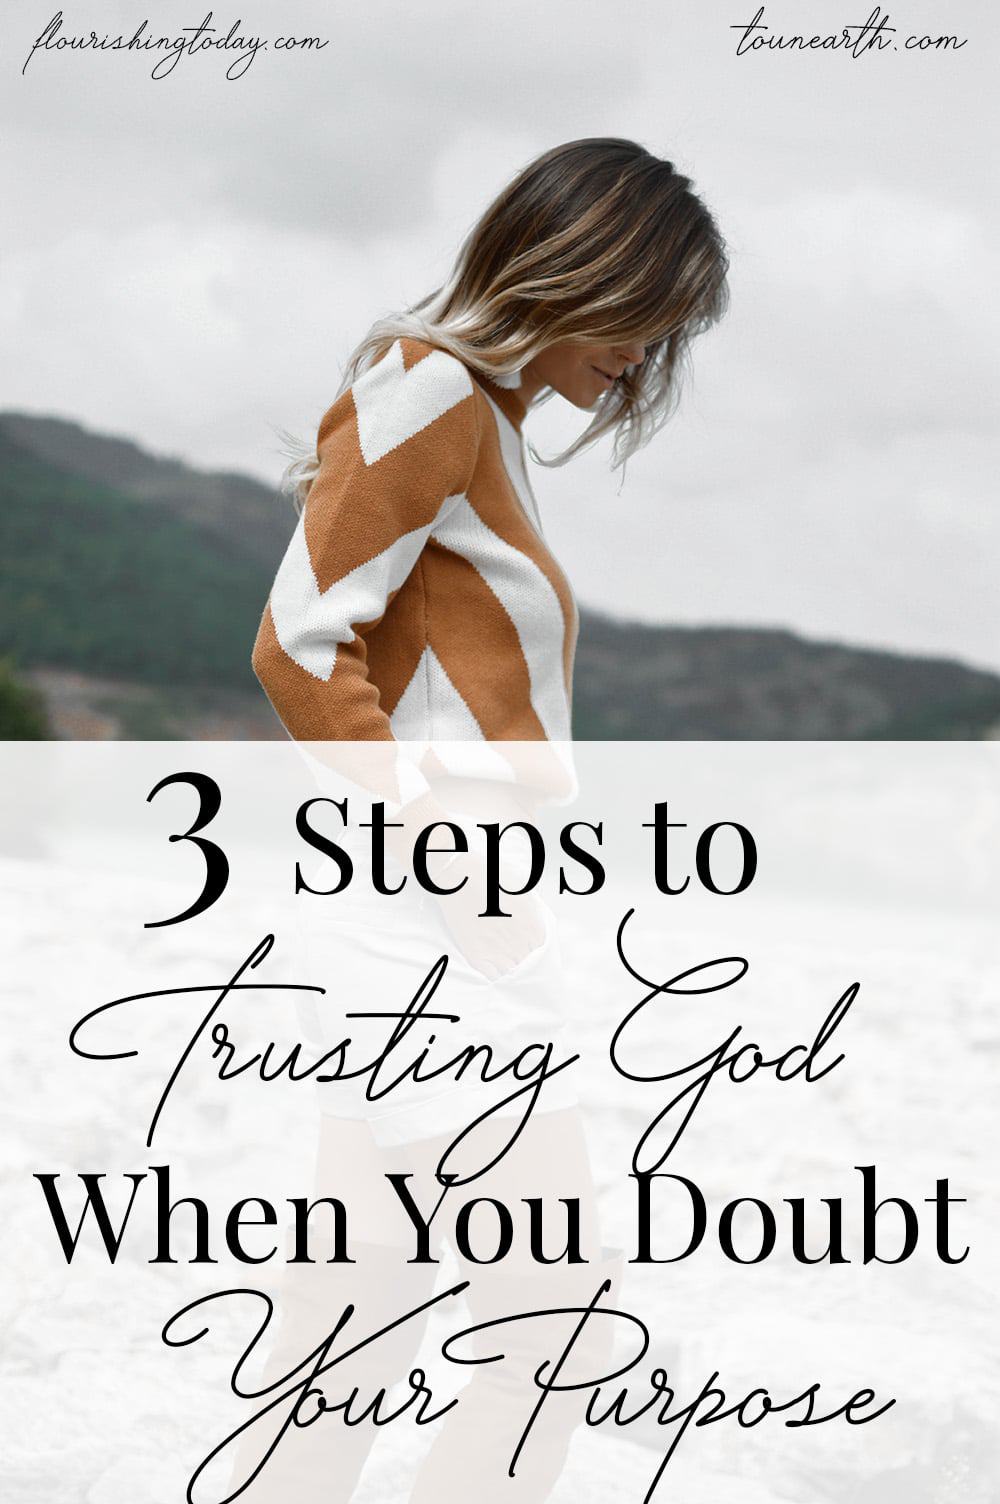 Are you doubting God's purpose for your life? Do you struggle not knowing the details of His will for you? Here's 3 steps to trusting God in the unknown. #trustingGod #purpose #walkinginpurpose #doubt